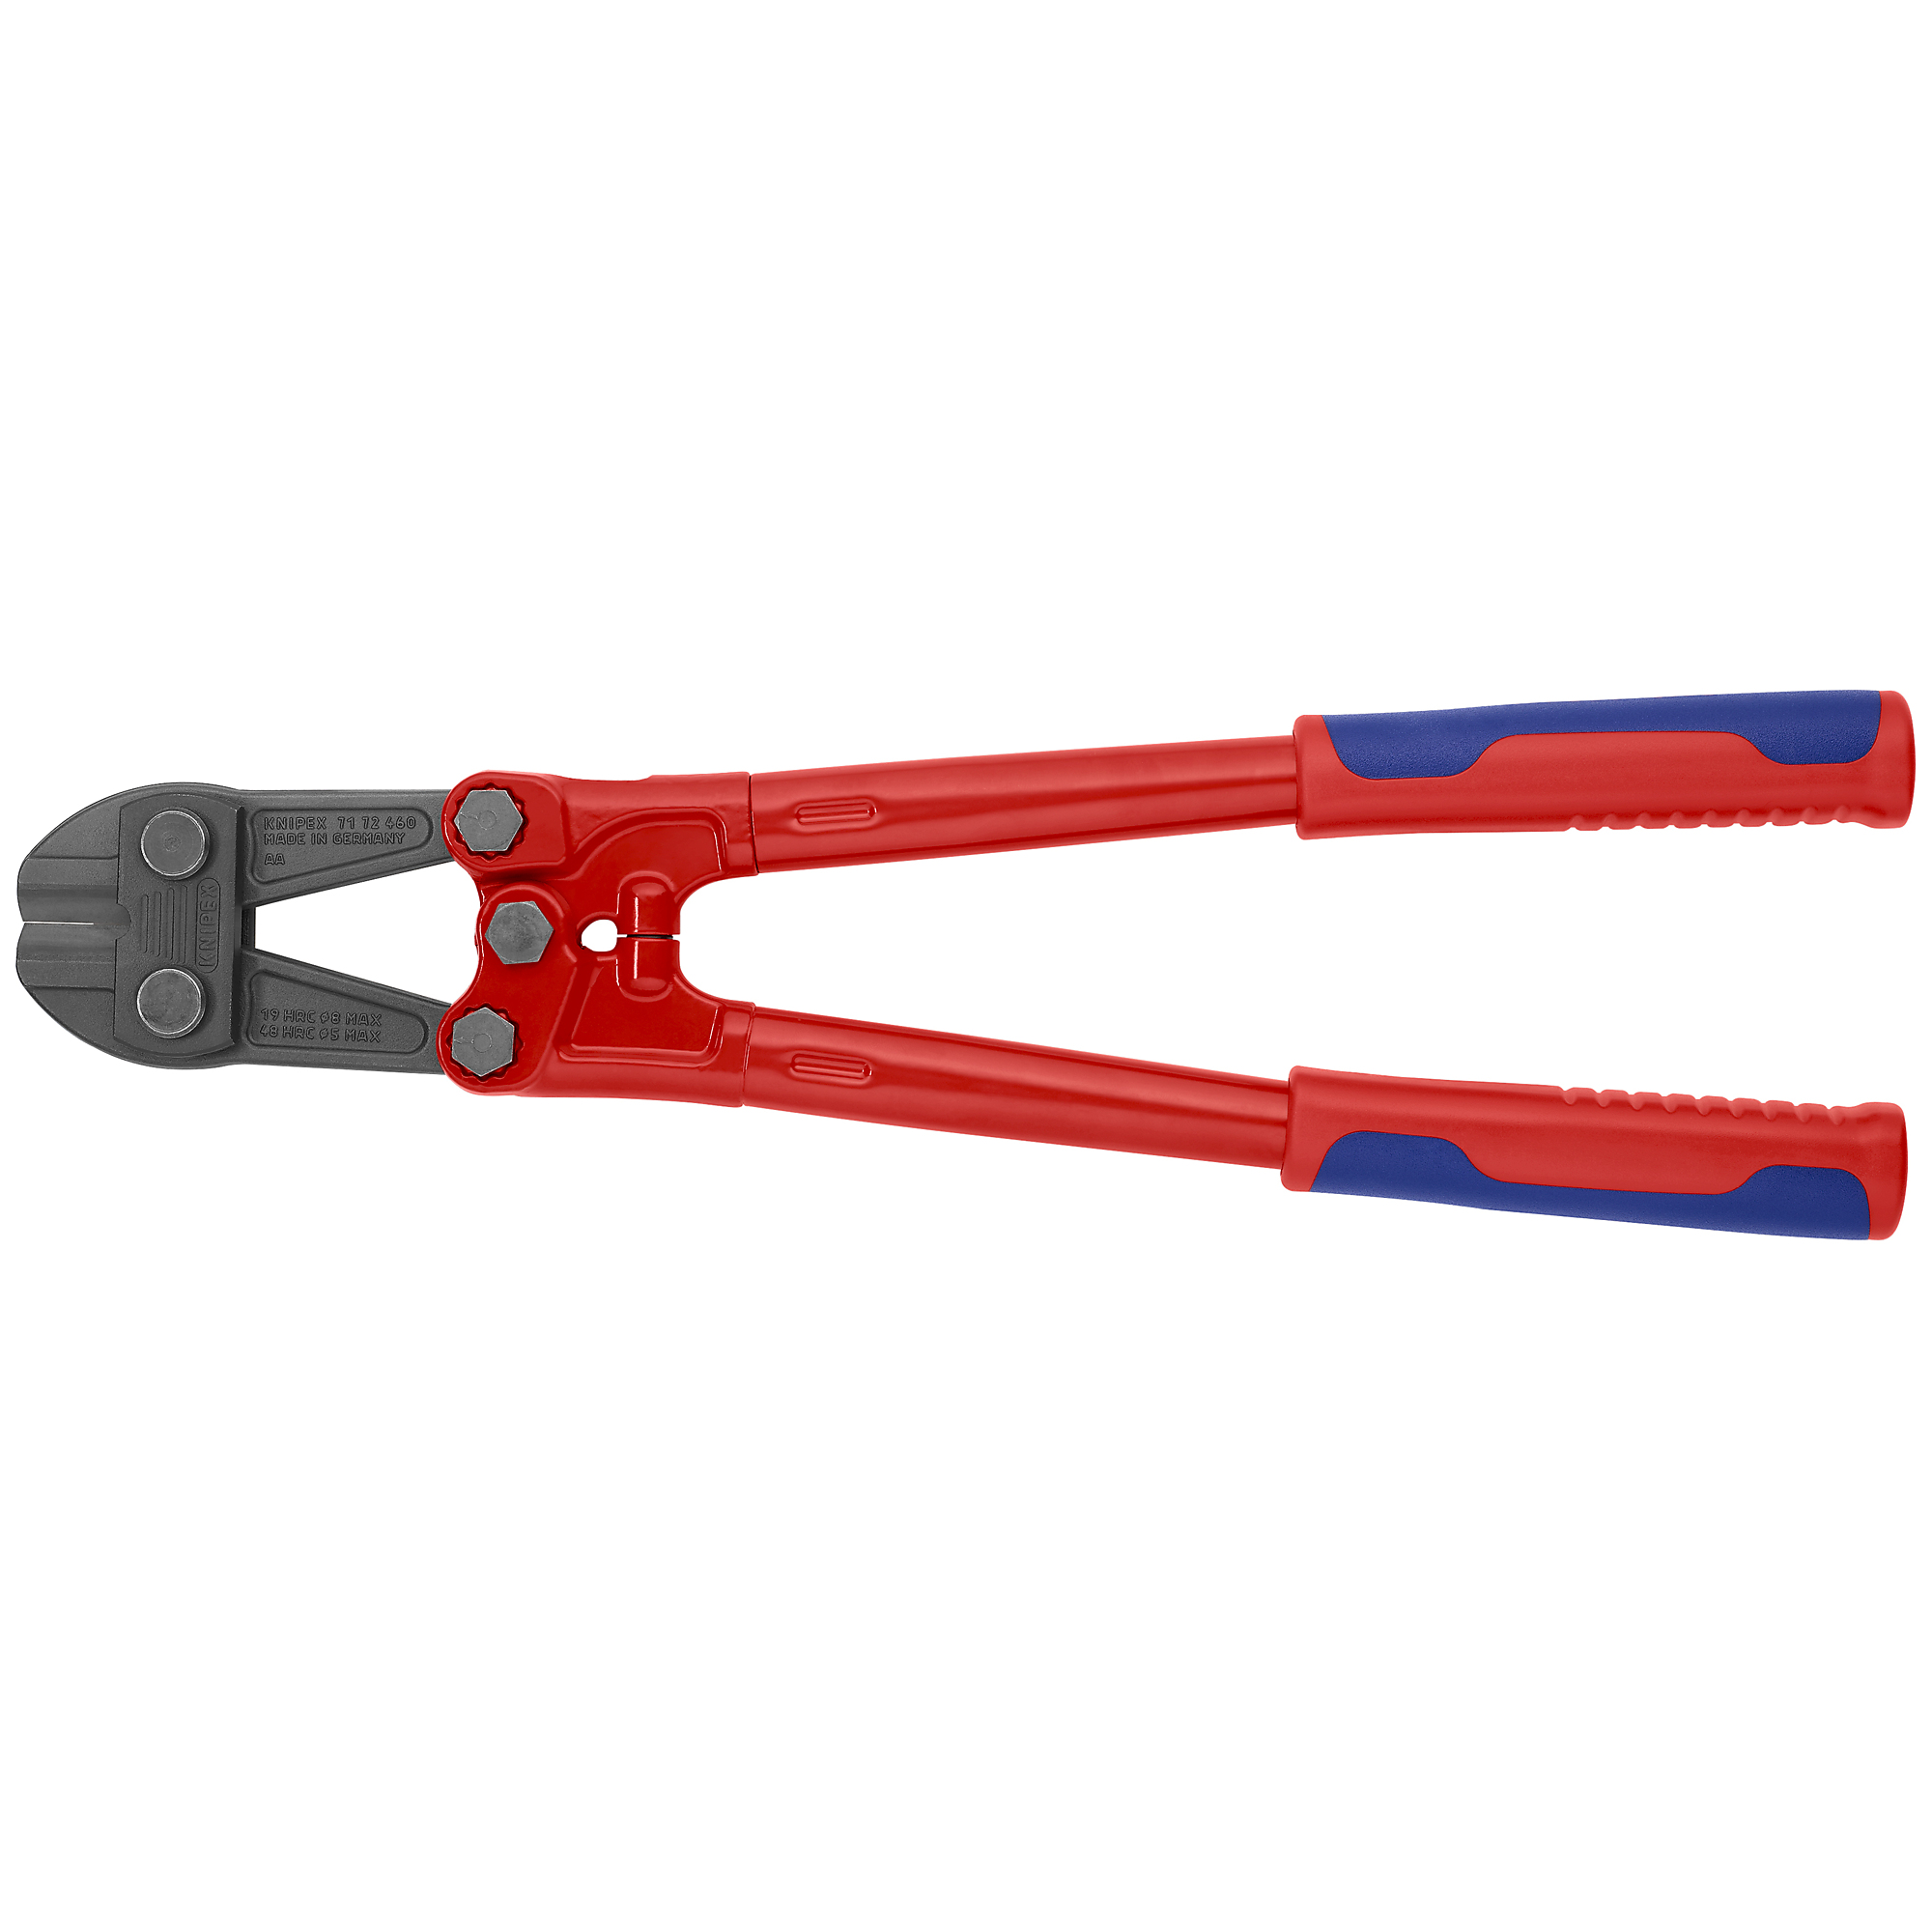 KNIPEX, Large Bolt Cutters, Comfort grip, 18.25Inch, Tool Length 18.25 in, Jaw Opening 0.63 in, Cutting Capacity 0.3125 in, Model 71 72 460